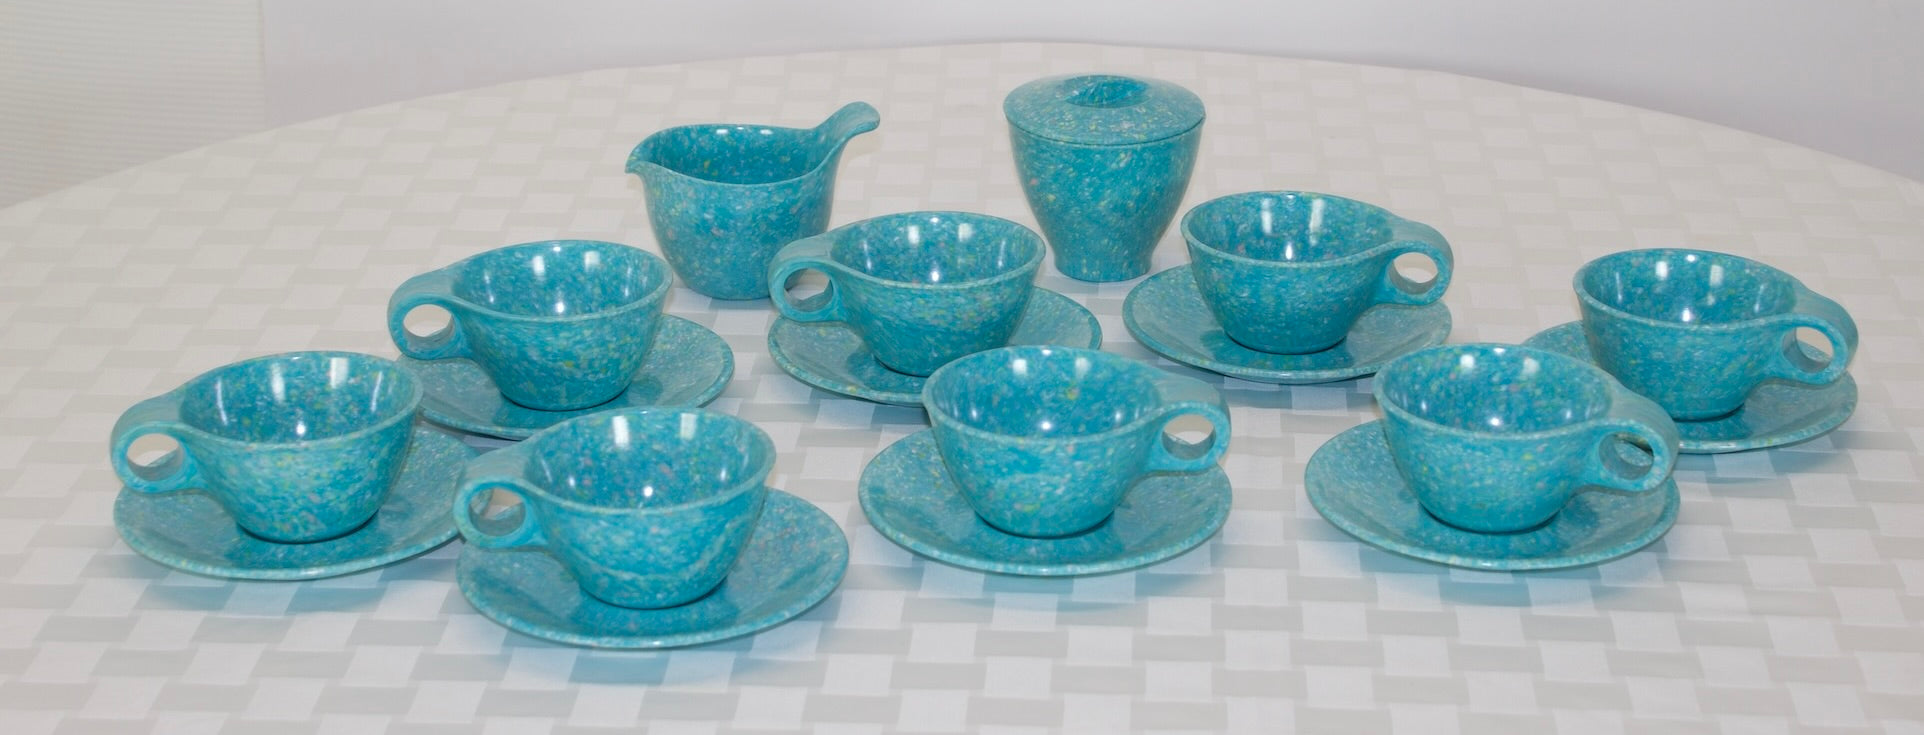 19 pc Turquoise Melamine Coffe set with creamer and sugar bowl